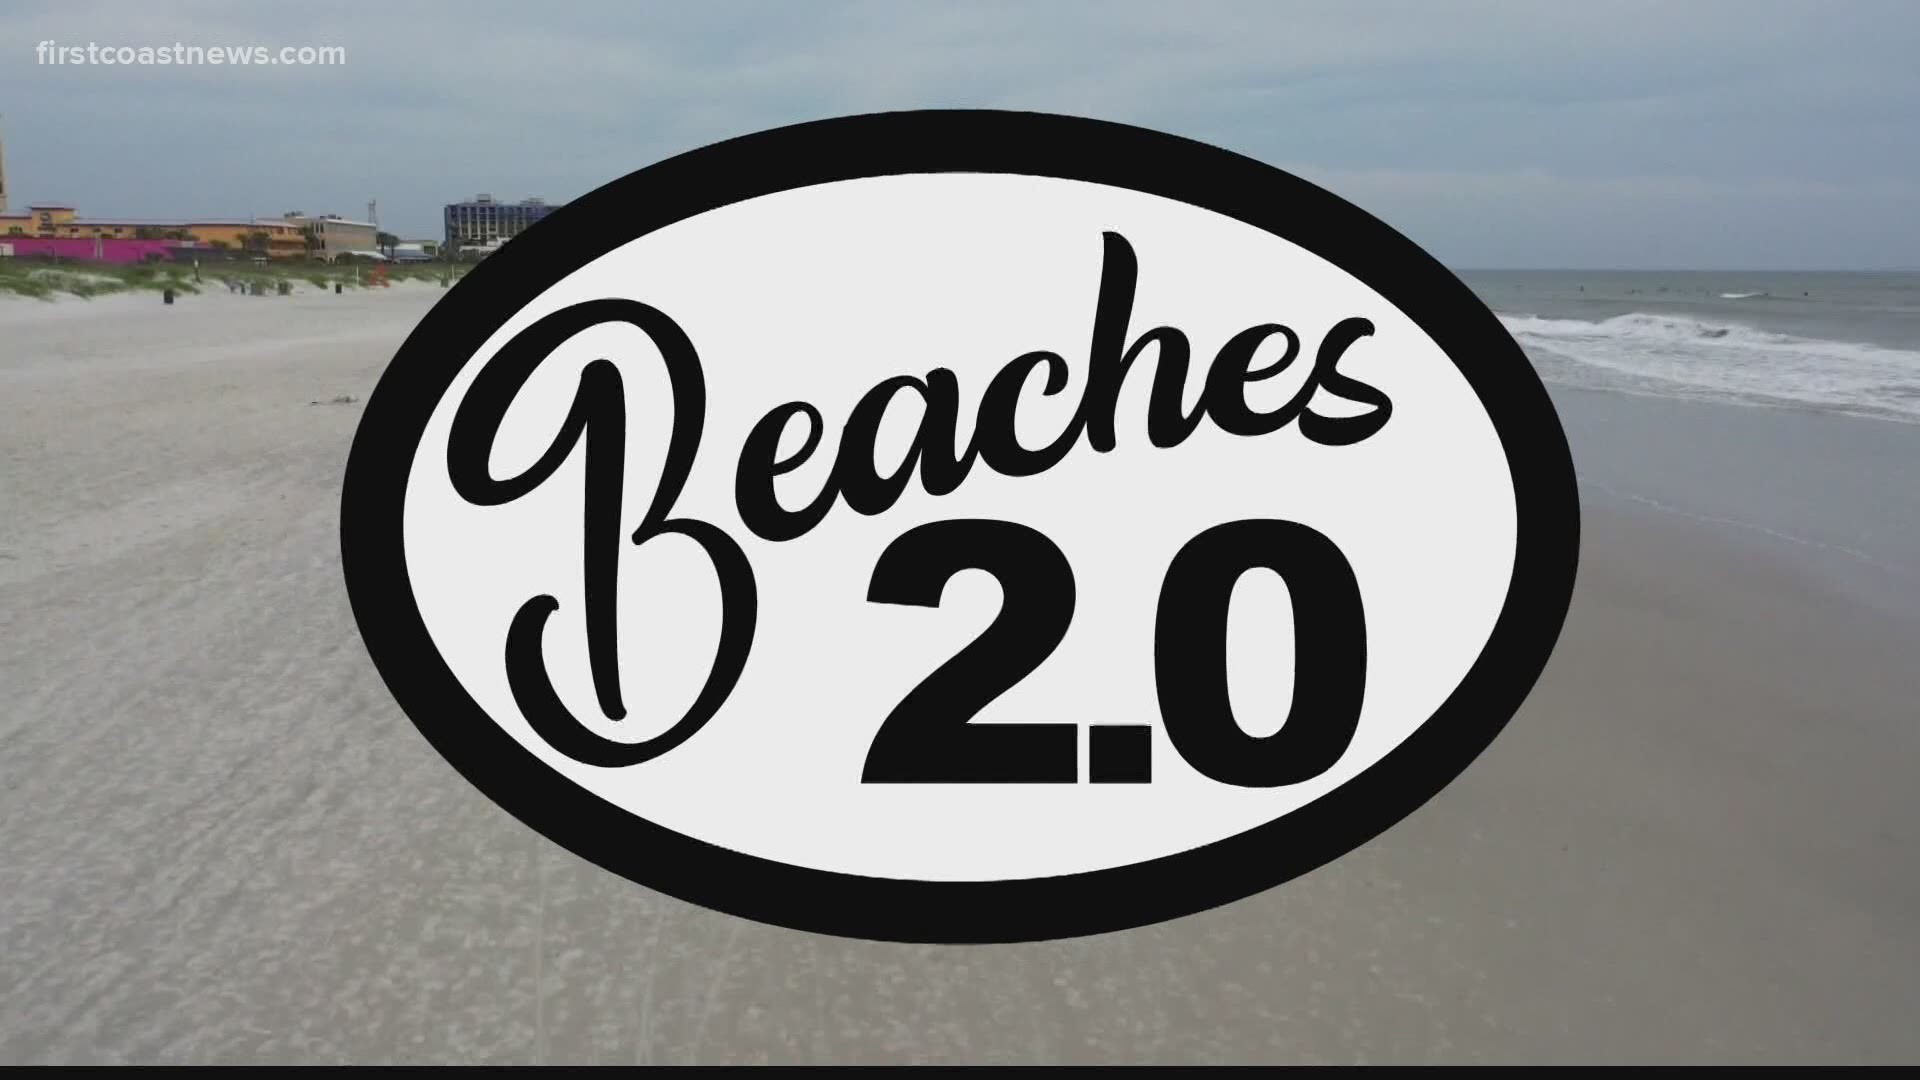 Many small businesses do not have money for advertising. Beaches 2.0 is community driven to help support these businesses.